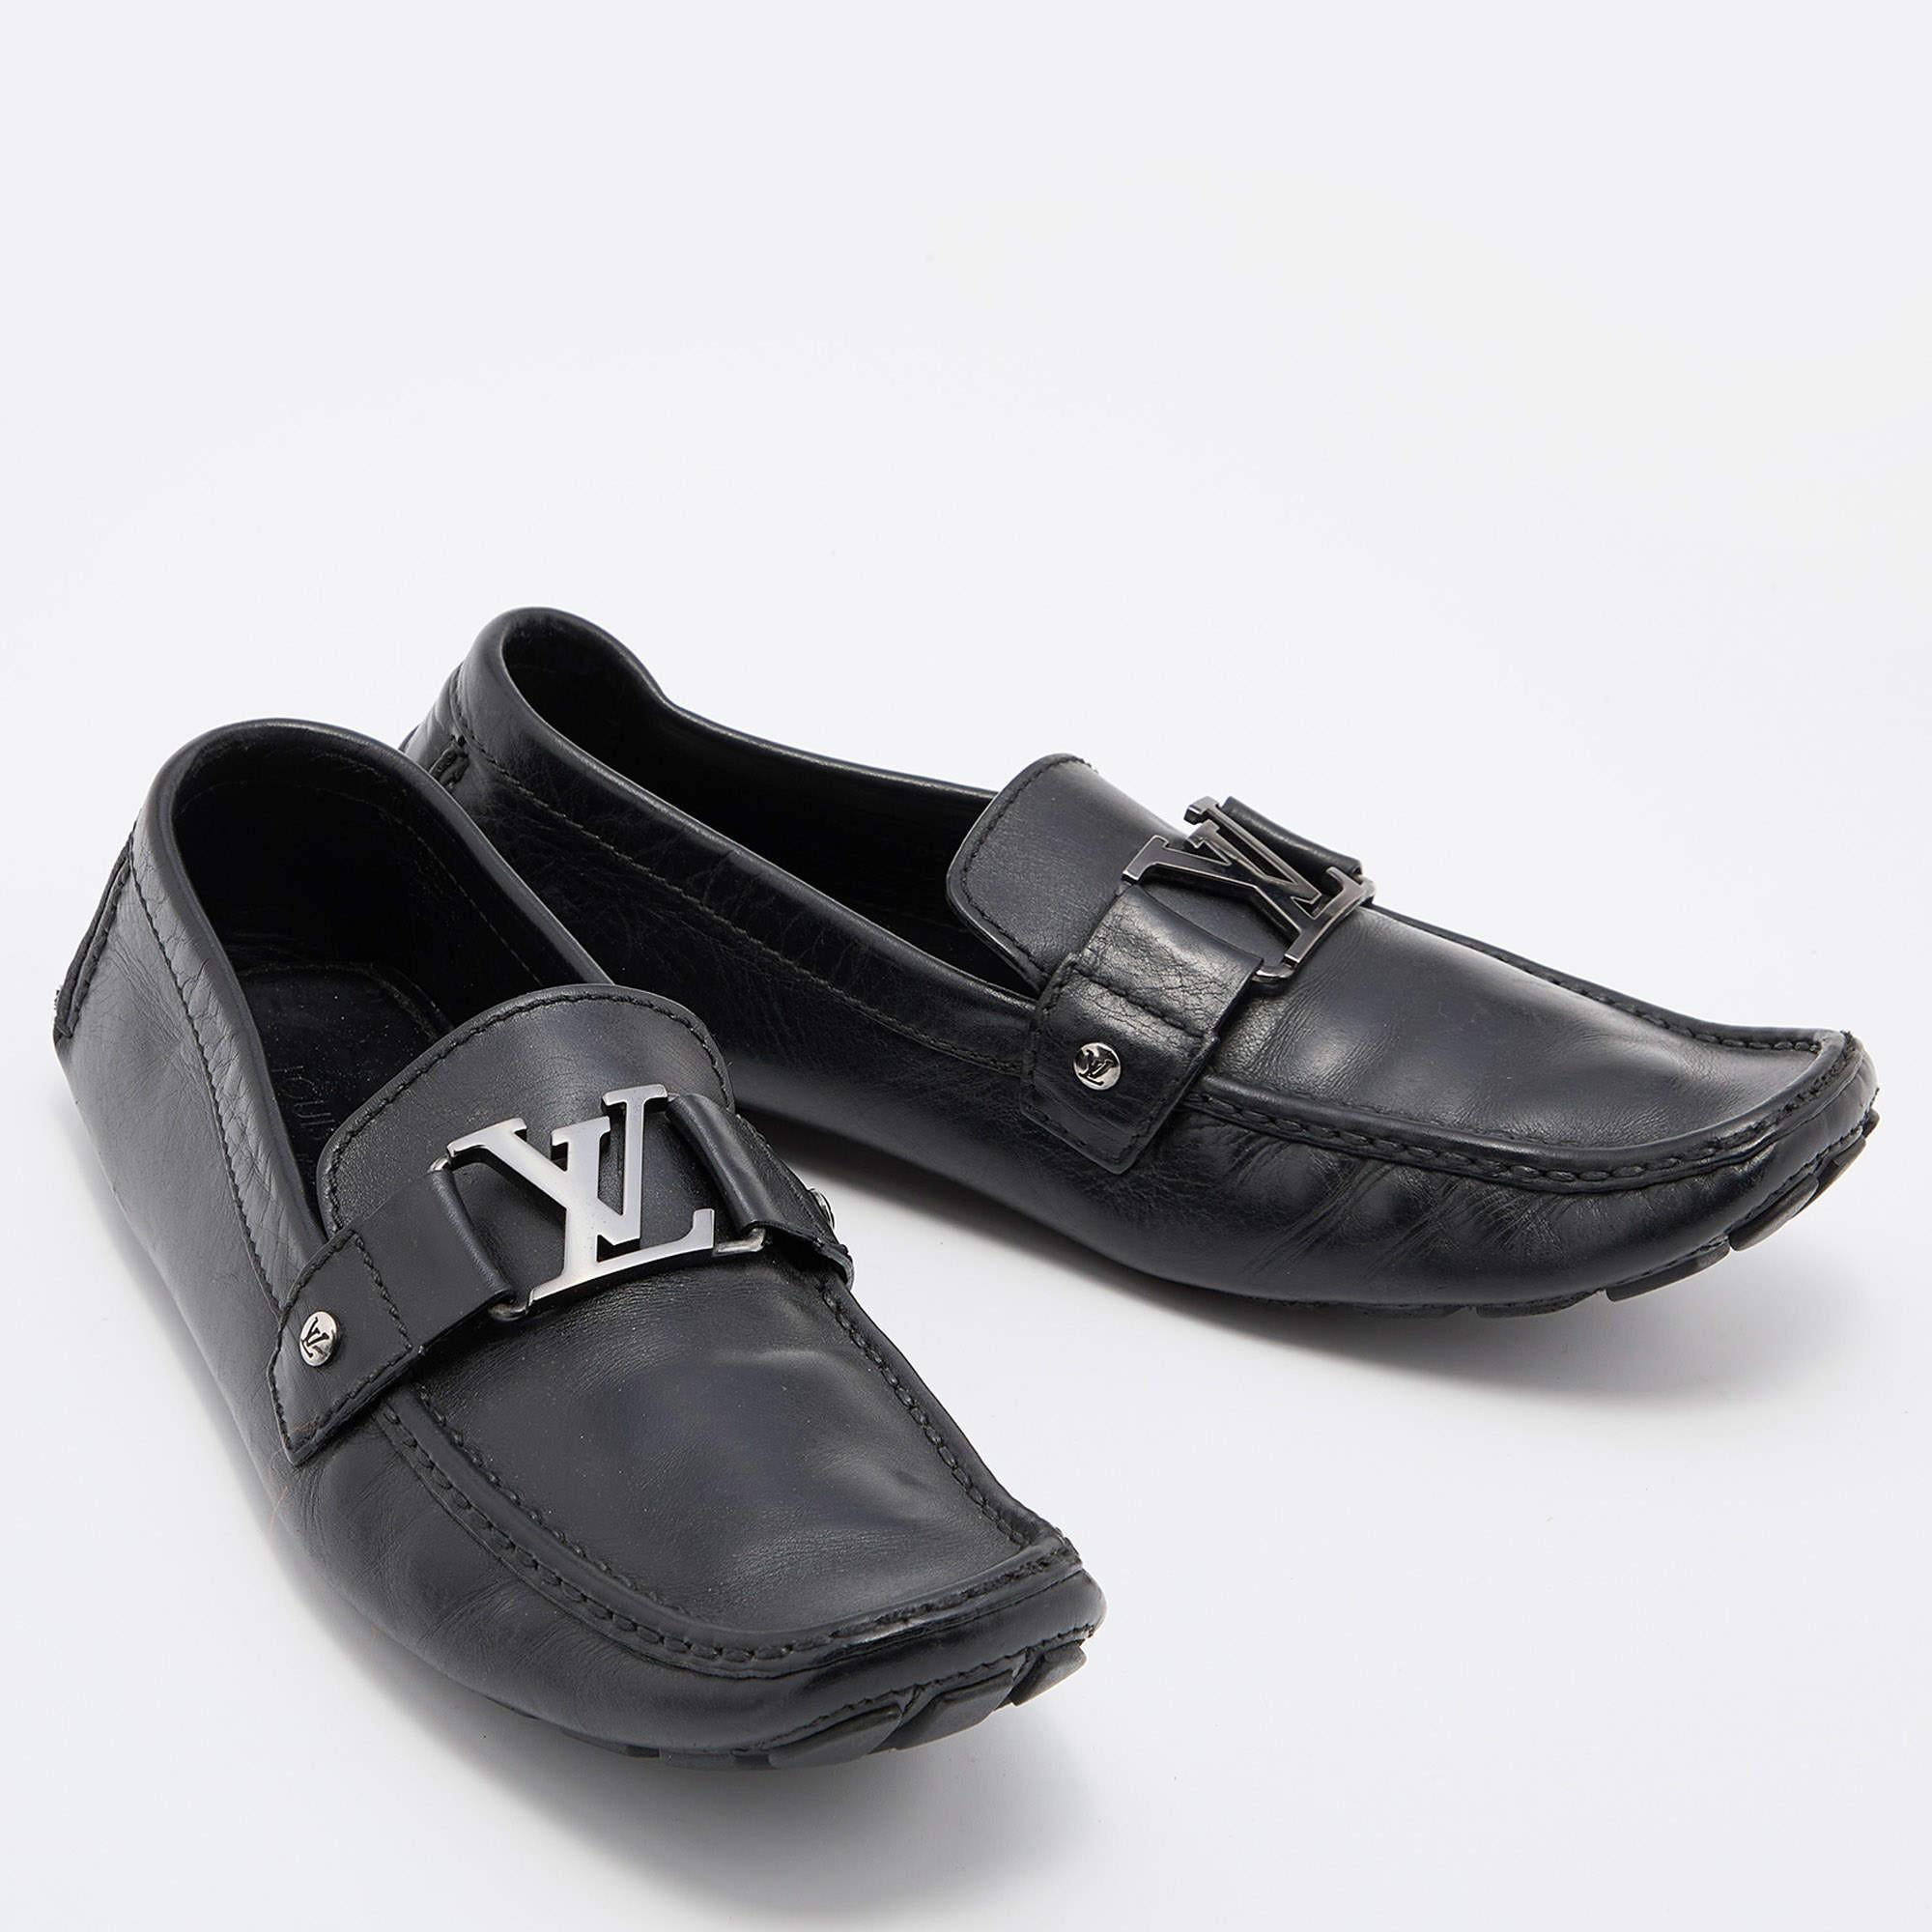 Louis Vuitton Black Leather Monte Carlo Slip On Loafers Size 43.5 1